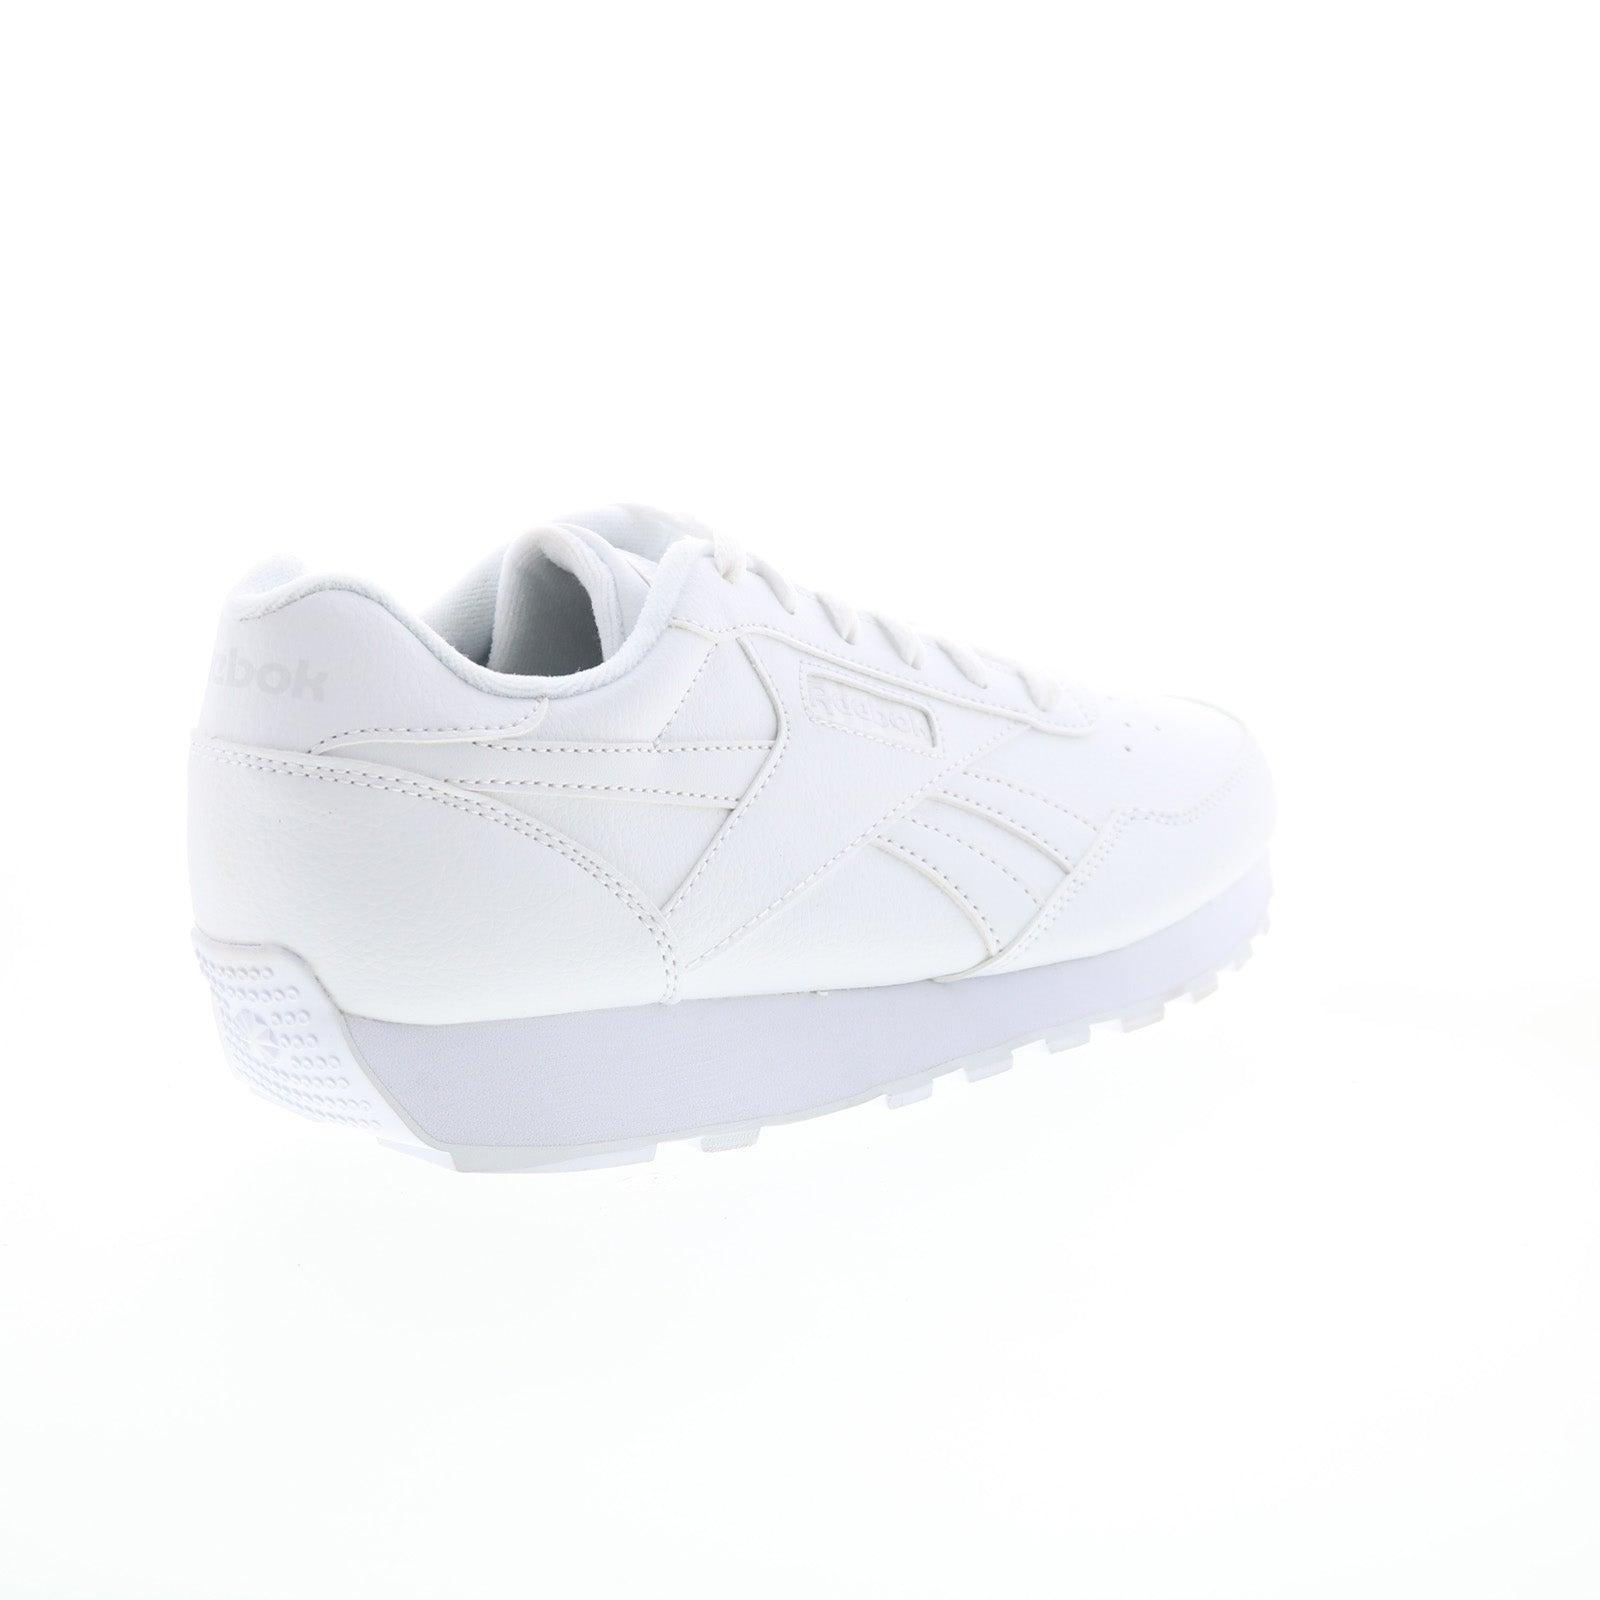 Reebok Rewind Run FY9708 Mens White Synthetic Lifestyle Sneakers